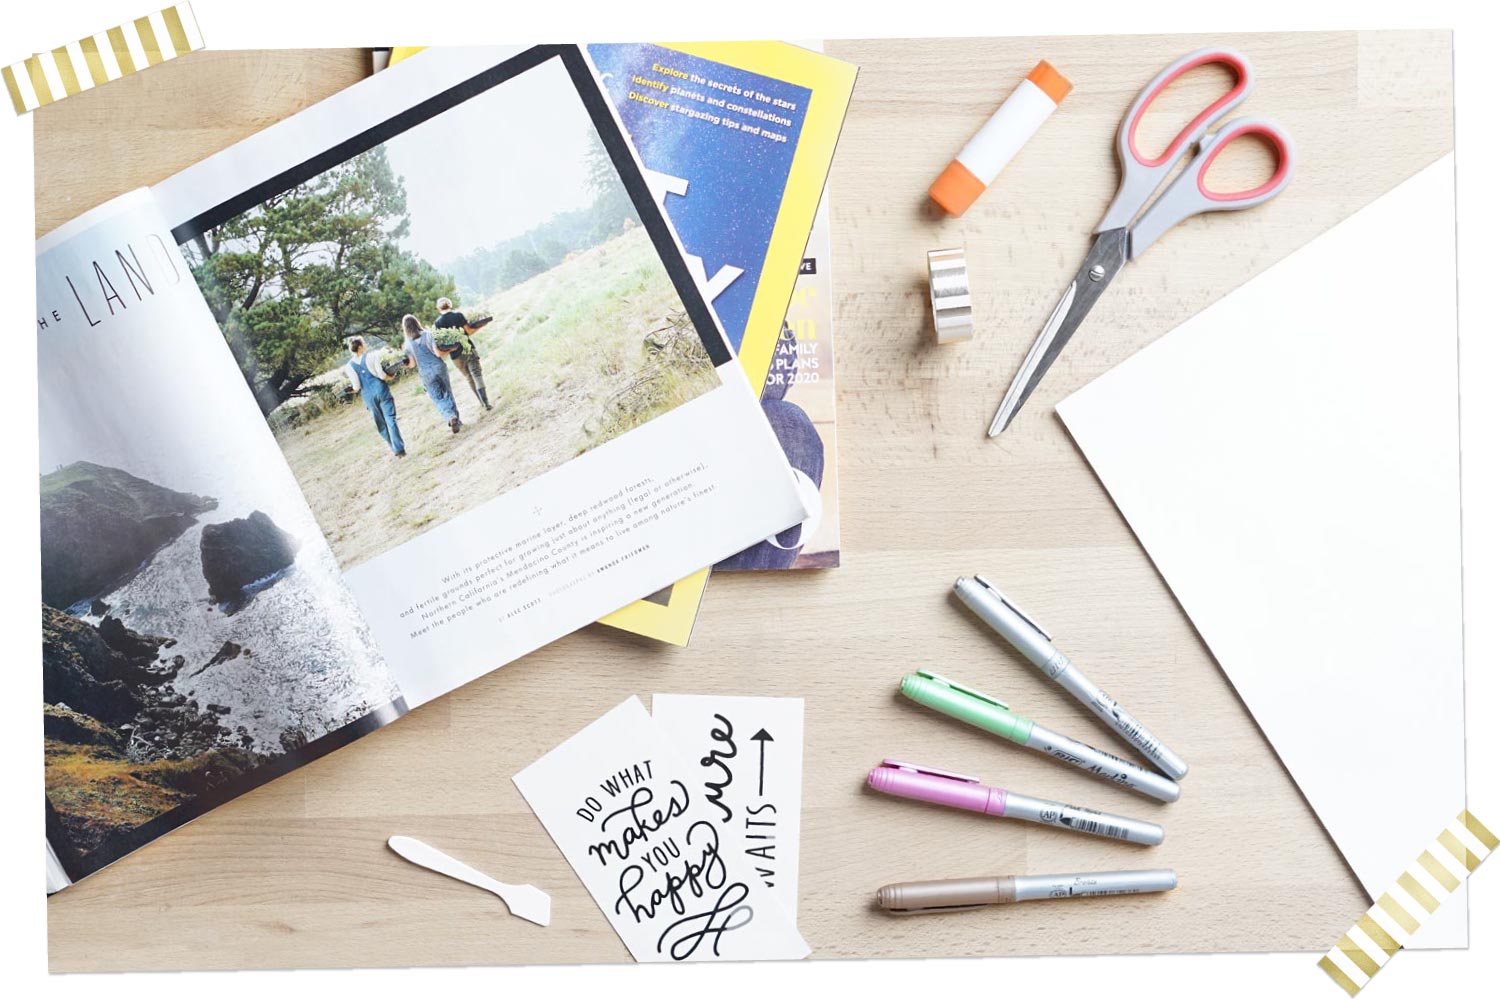 DIY Vision Board Ideas For Students